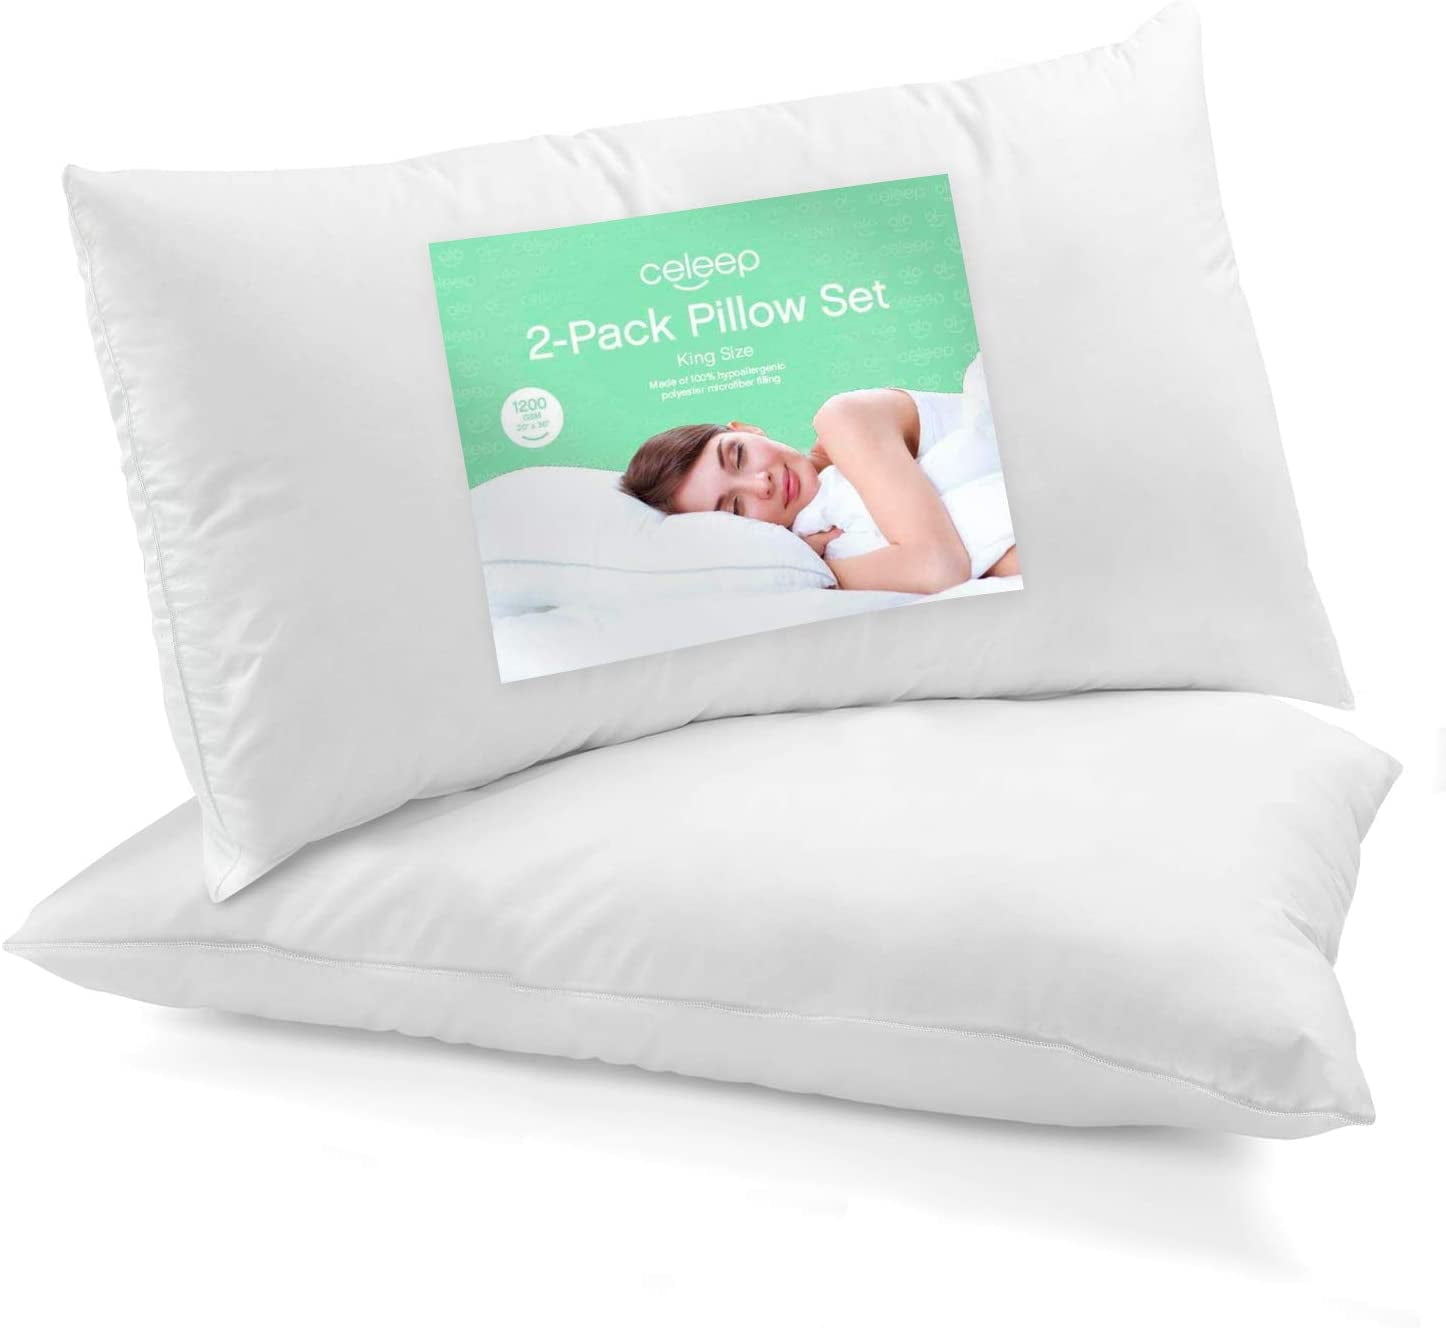 2-pk 1hotel Premier Collection Queen Pillows by Member's Mark Bedroom for sale online 